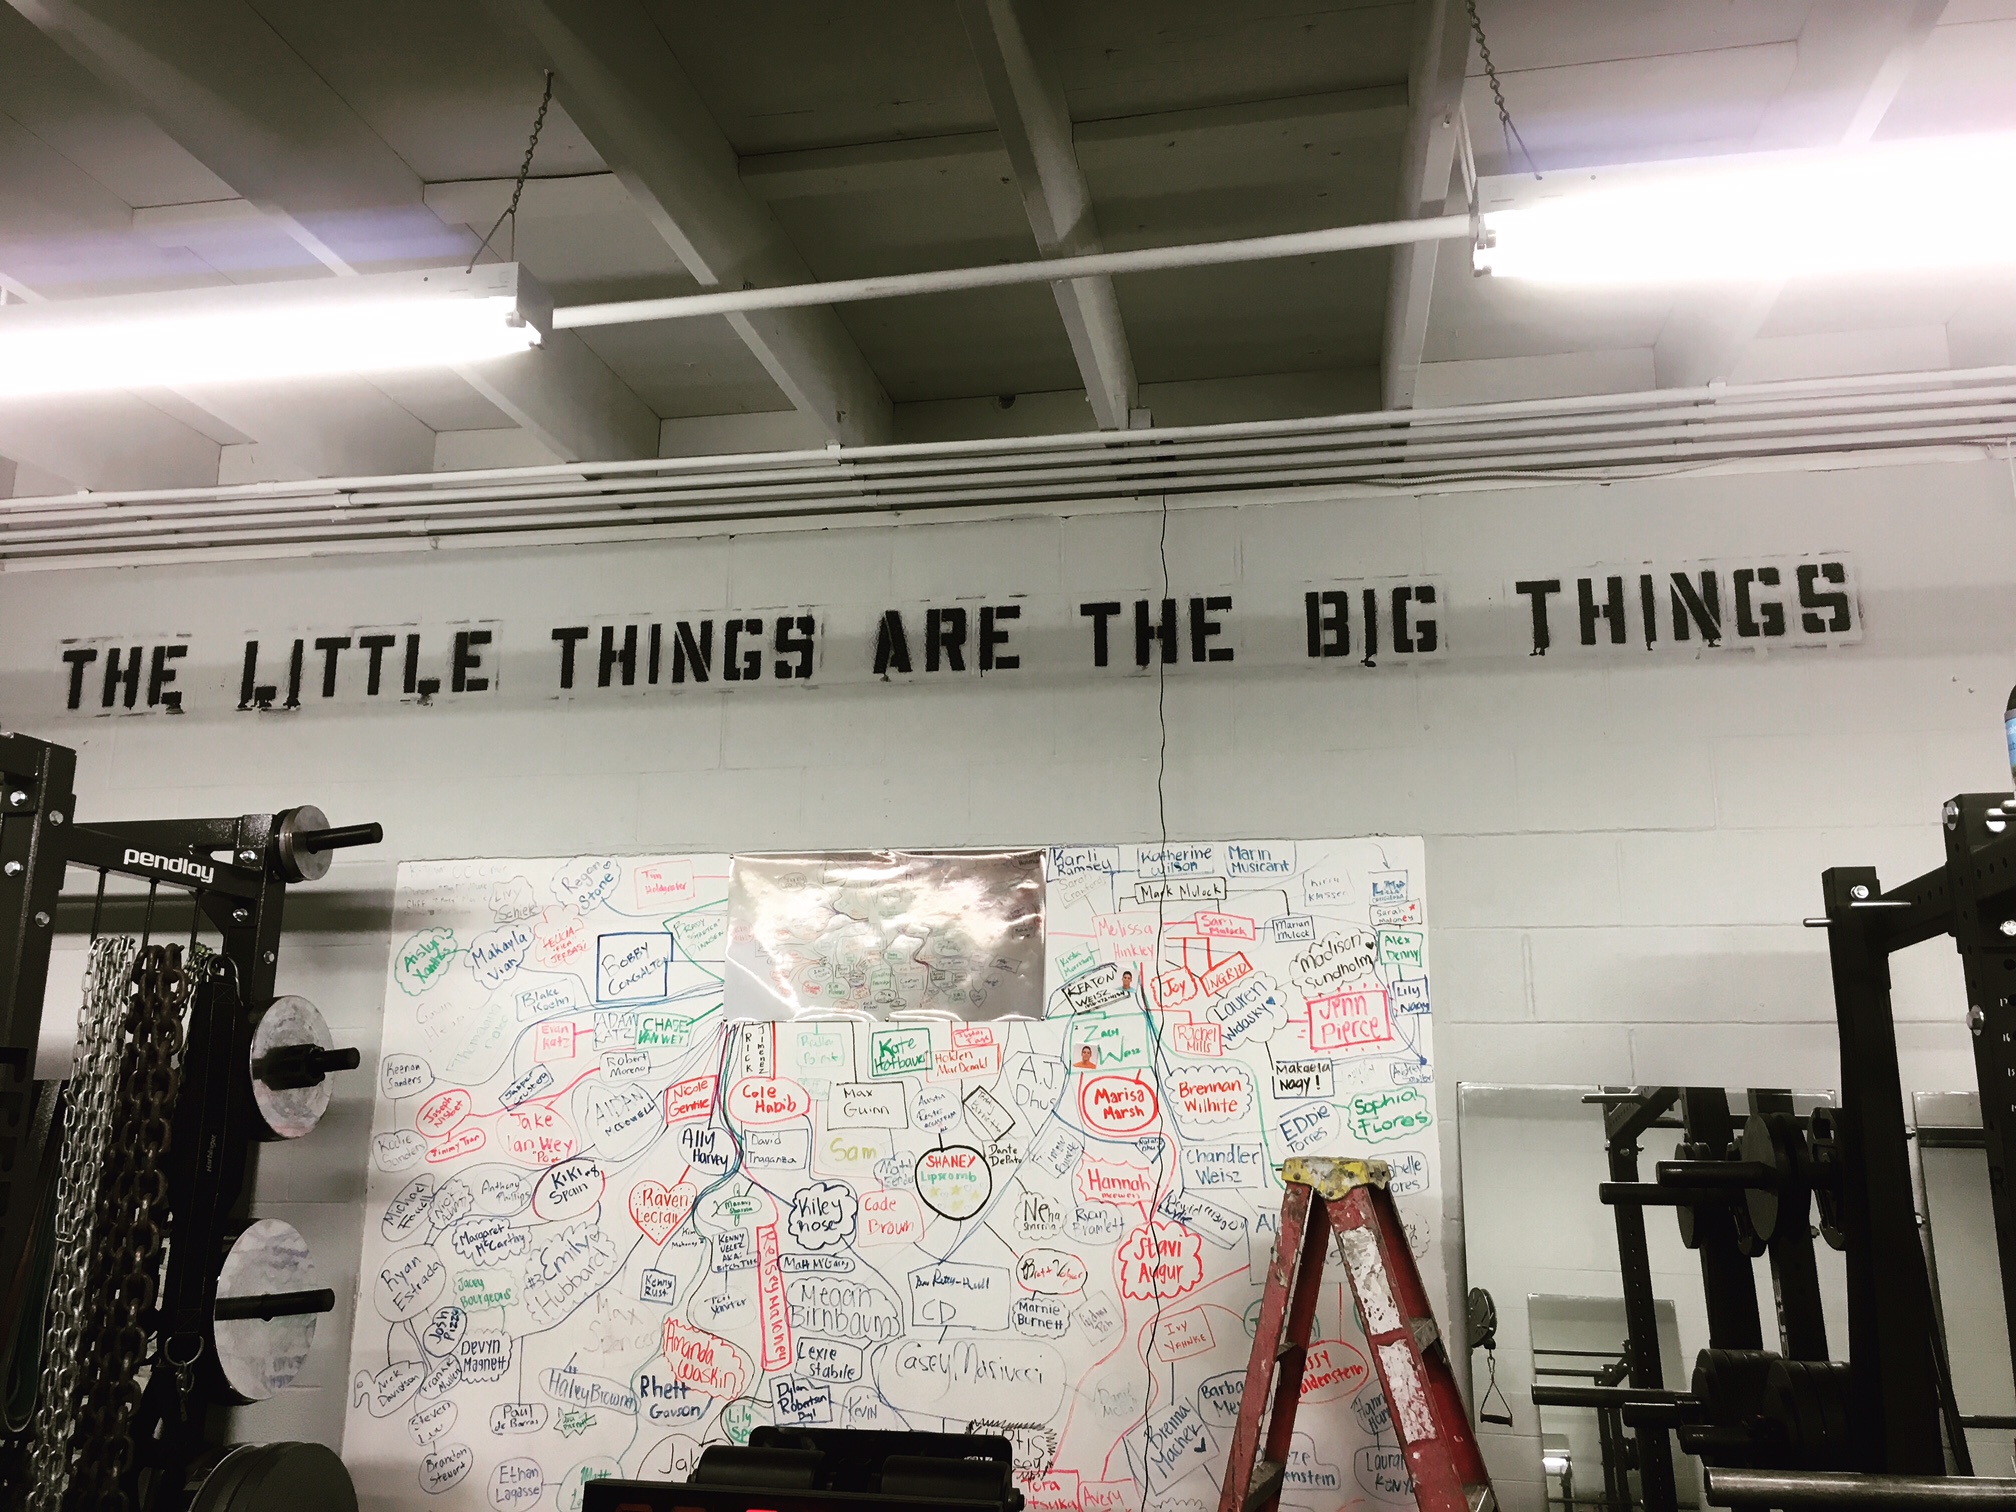 The Little Things Are the Big Things message on the wall at 1RM Performance